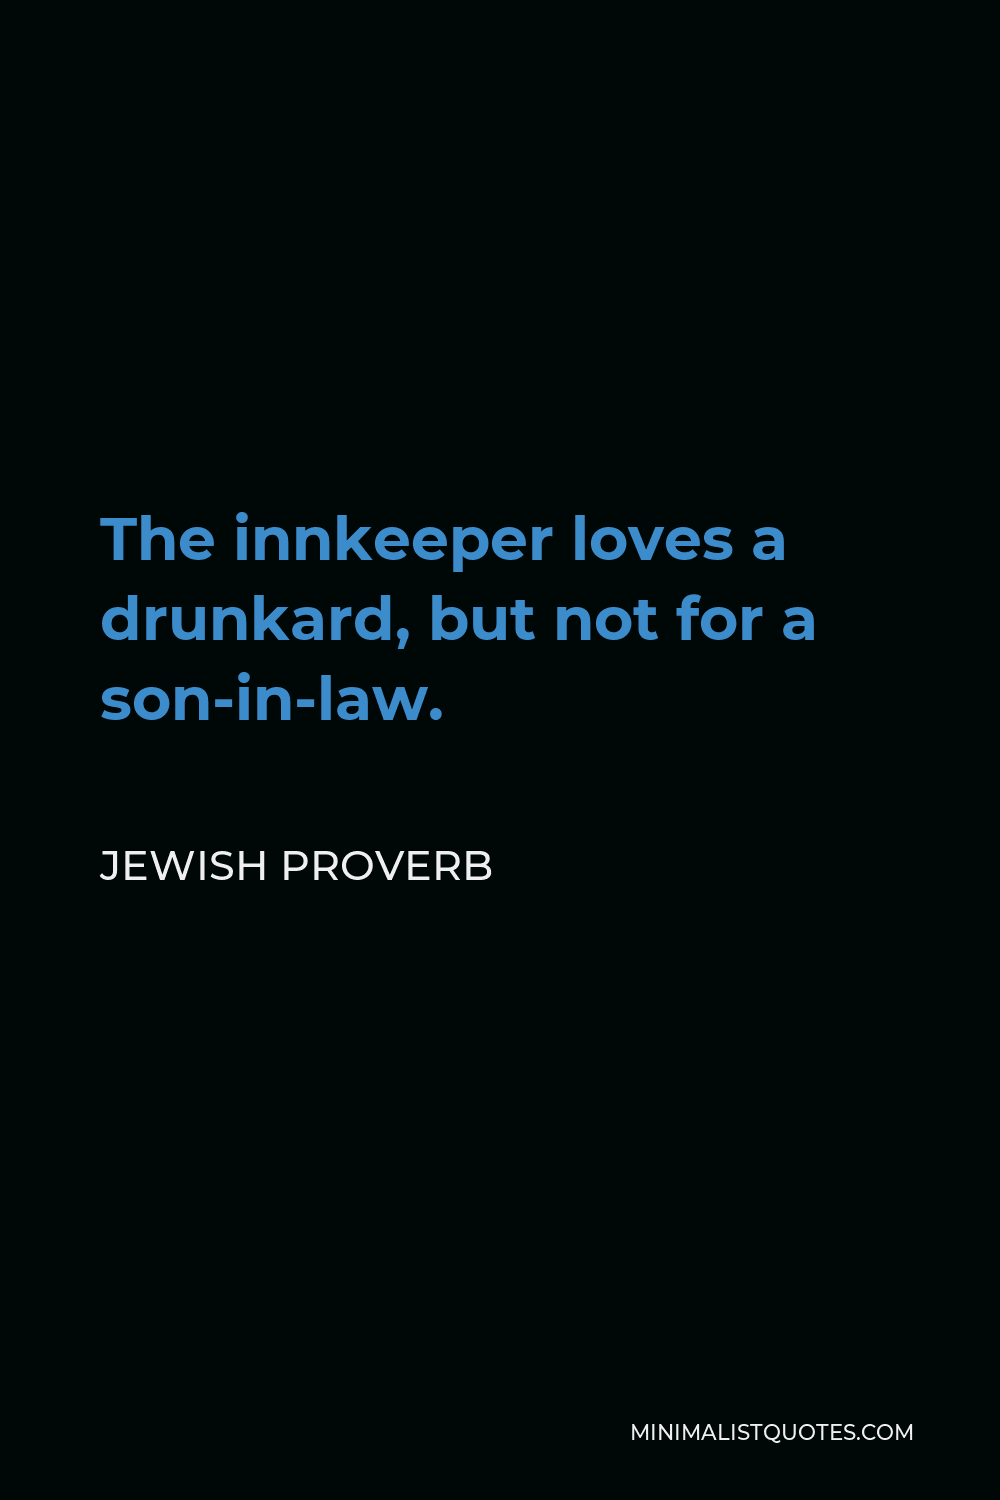 Jewish Proverb Quote - The innkeeper loves a drunkard, but not for a son-in-law.